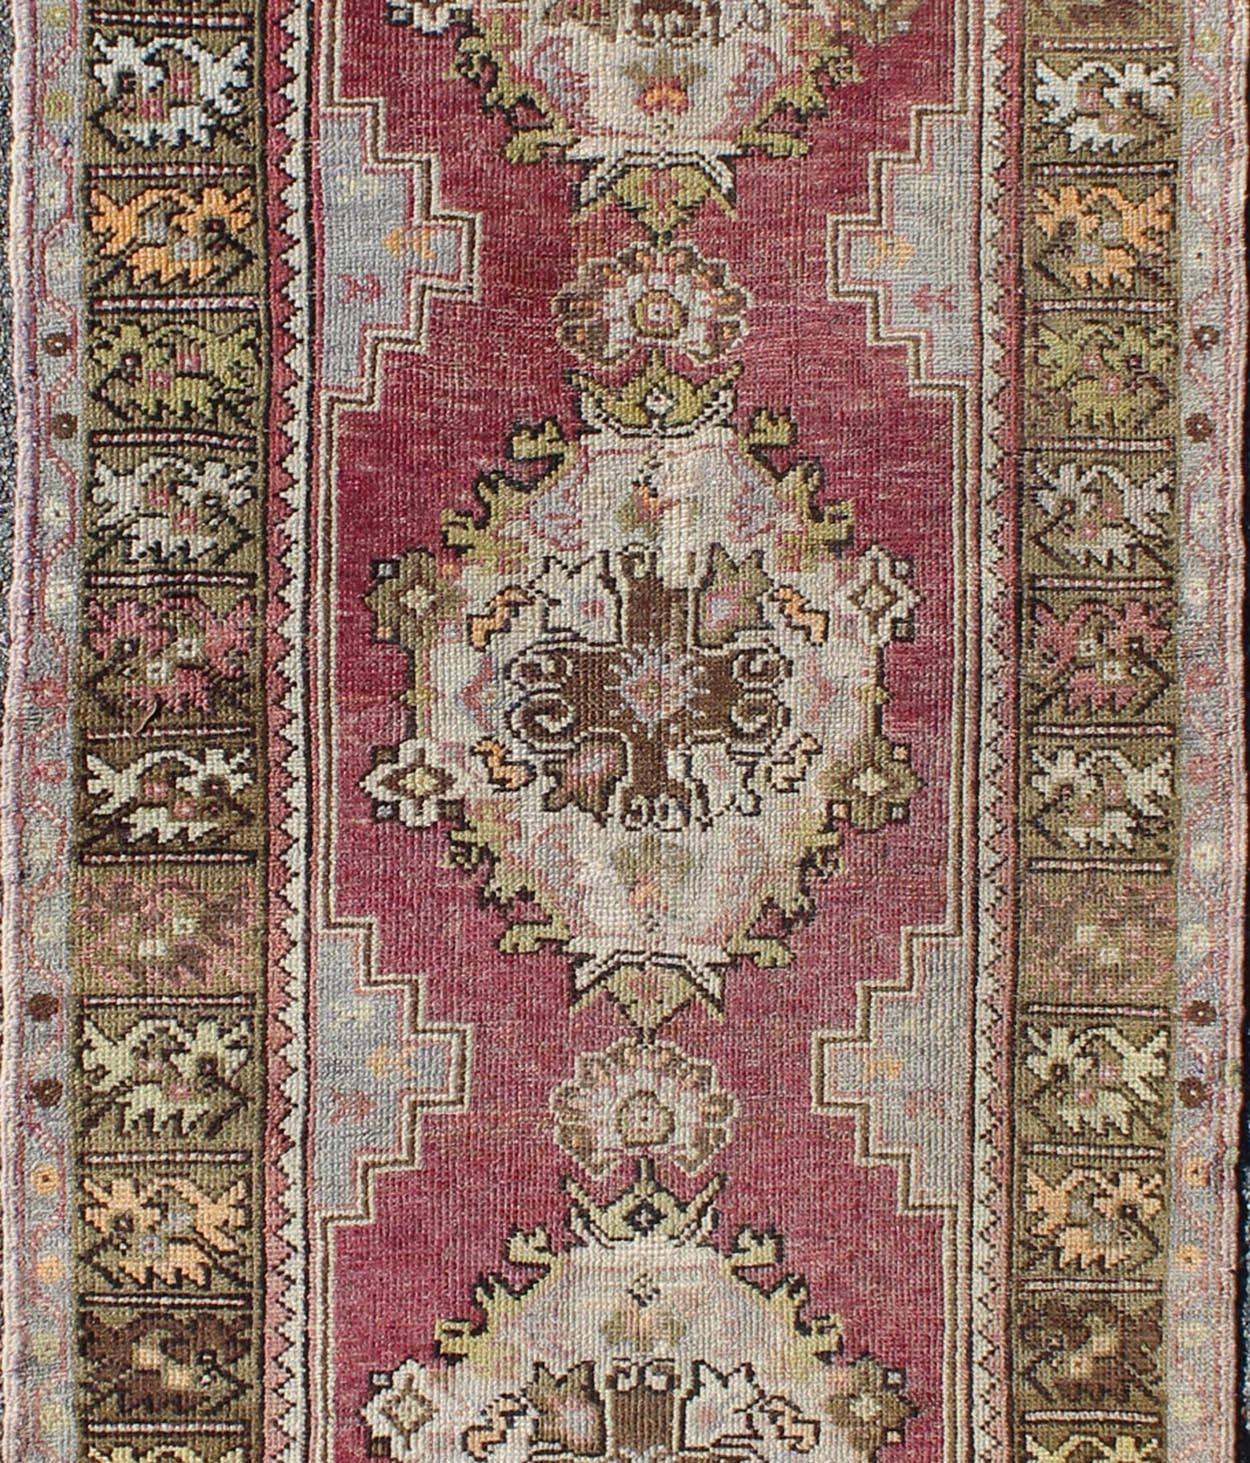 Hand-Knotted Berry Tri-Medallion Vintage Turkey Oushak Runner with Gray, Camel, Blush Accents For Sale